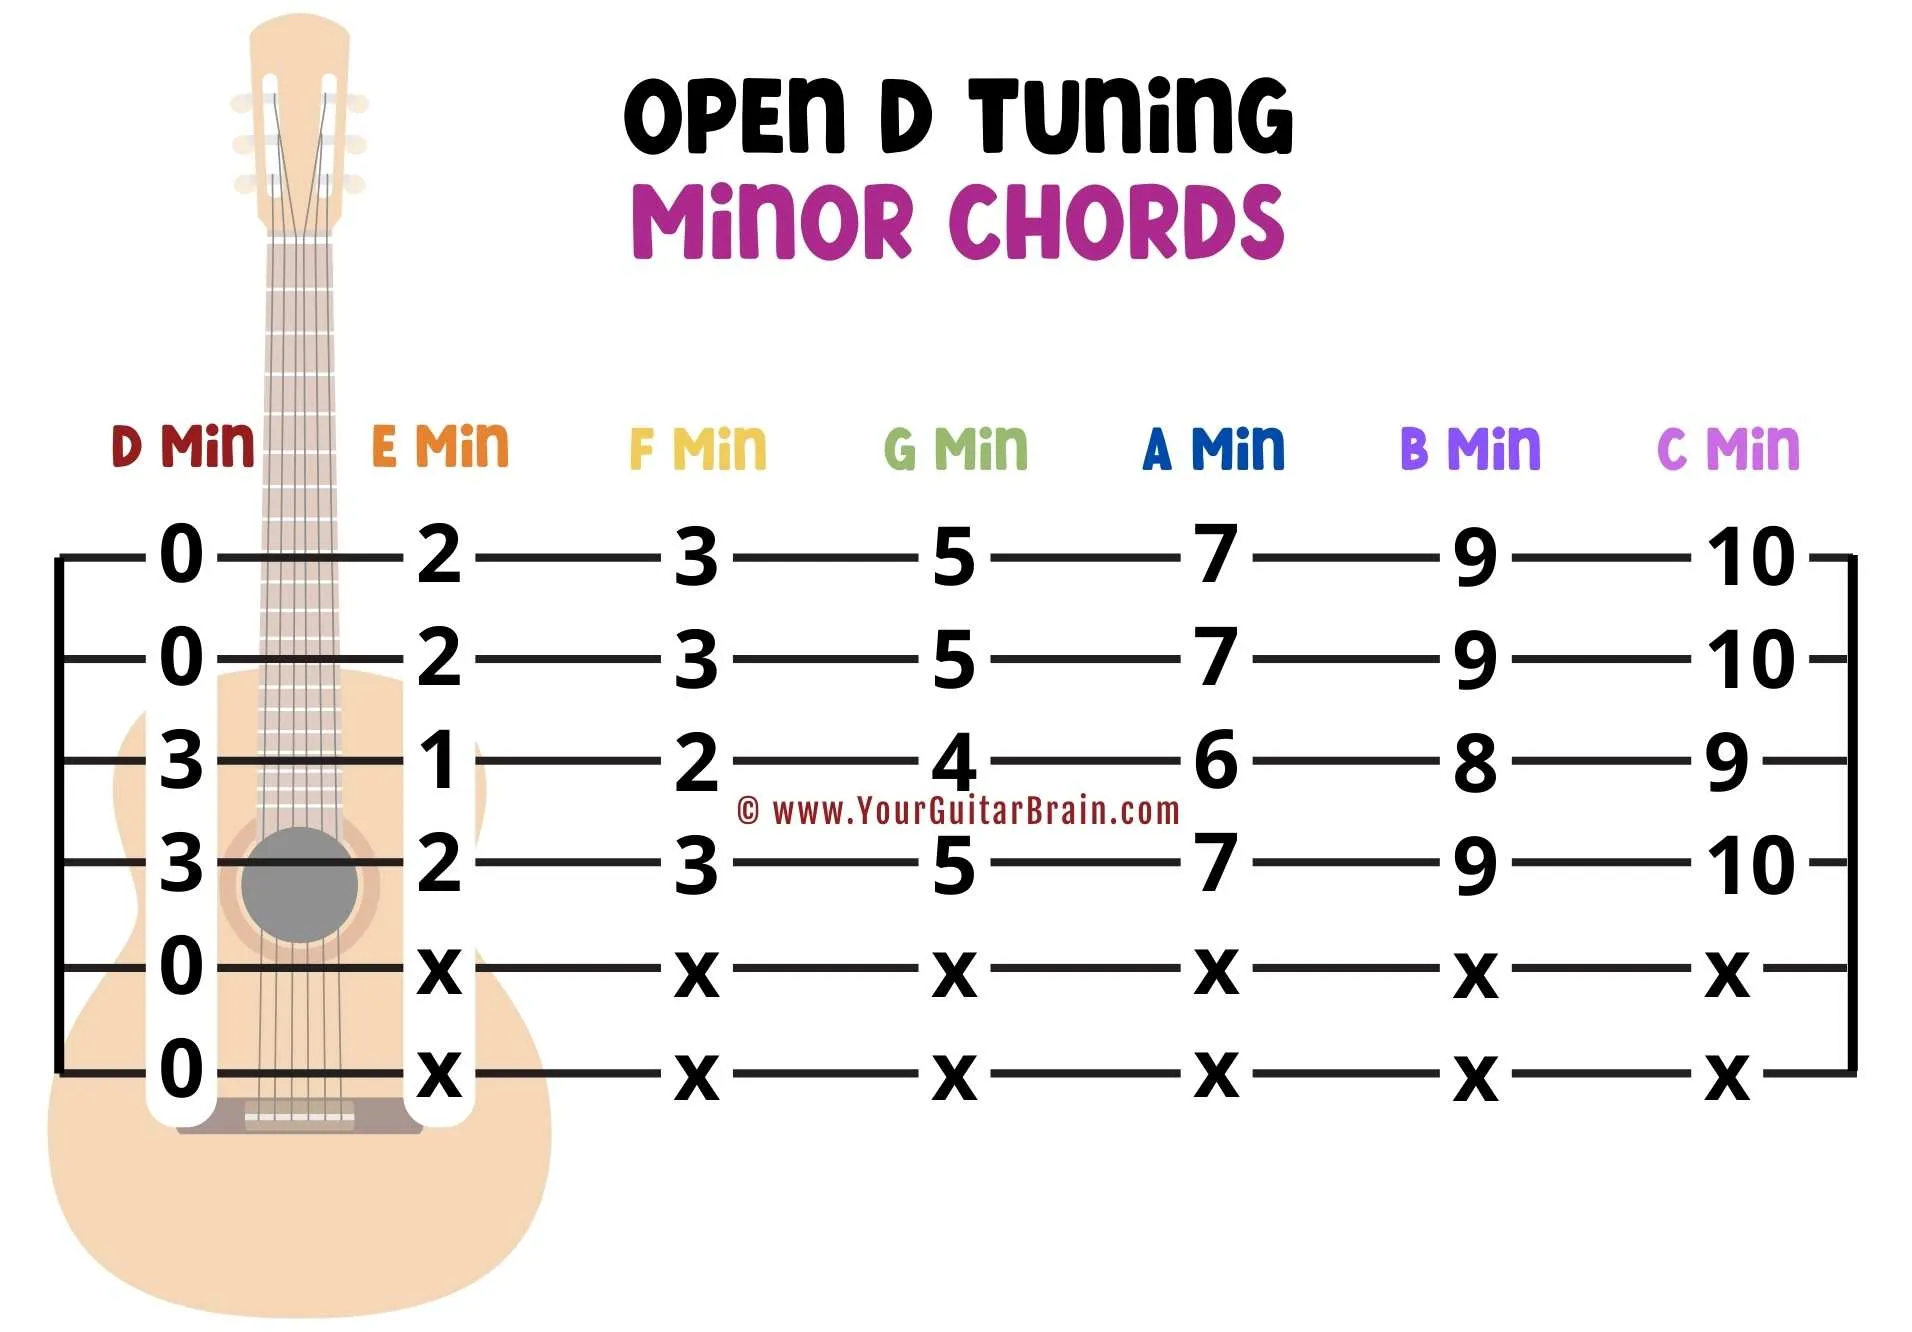 Open D Tuning Minor Chords for guitar